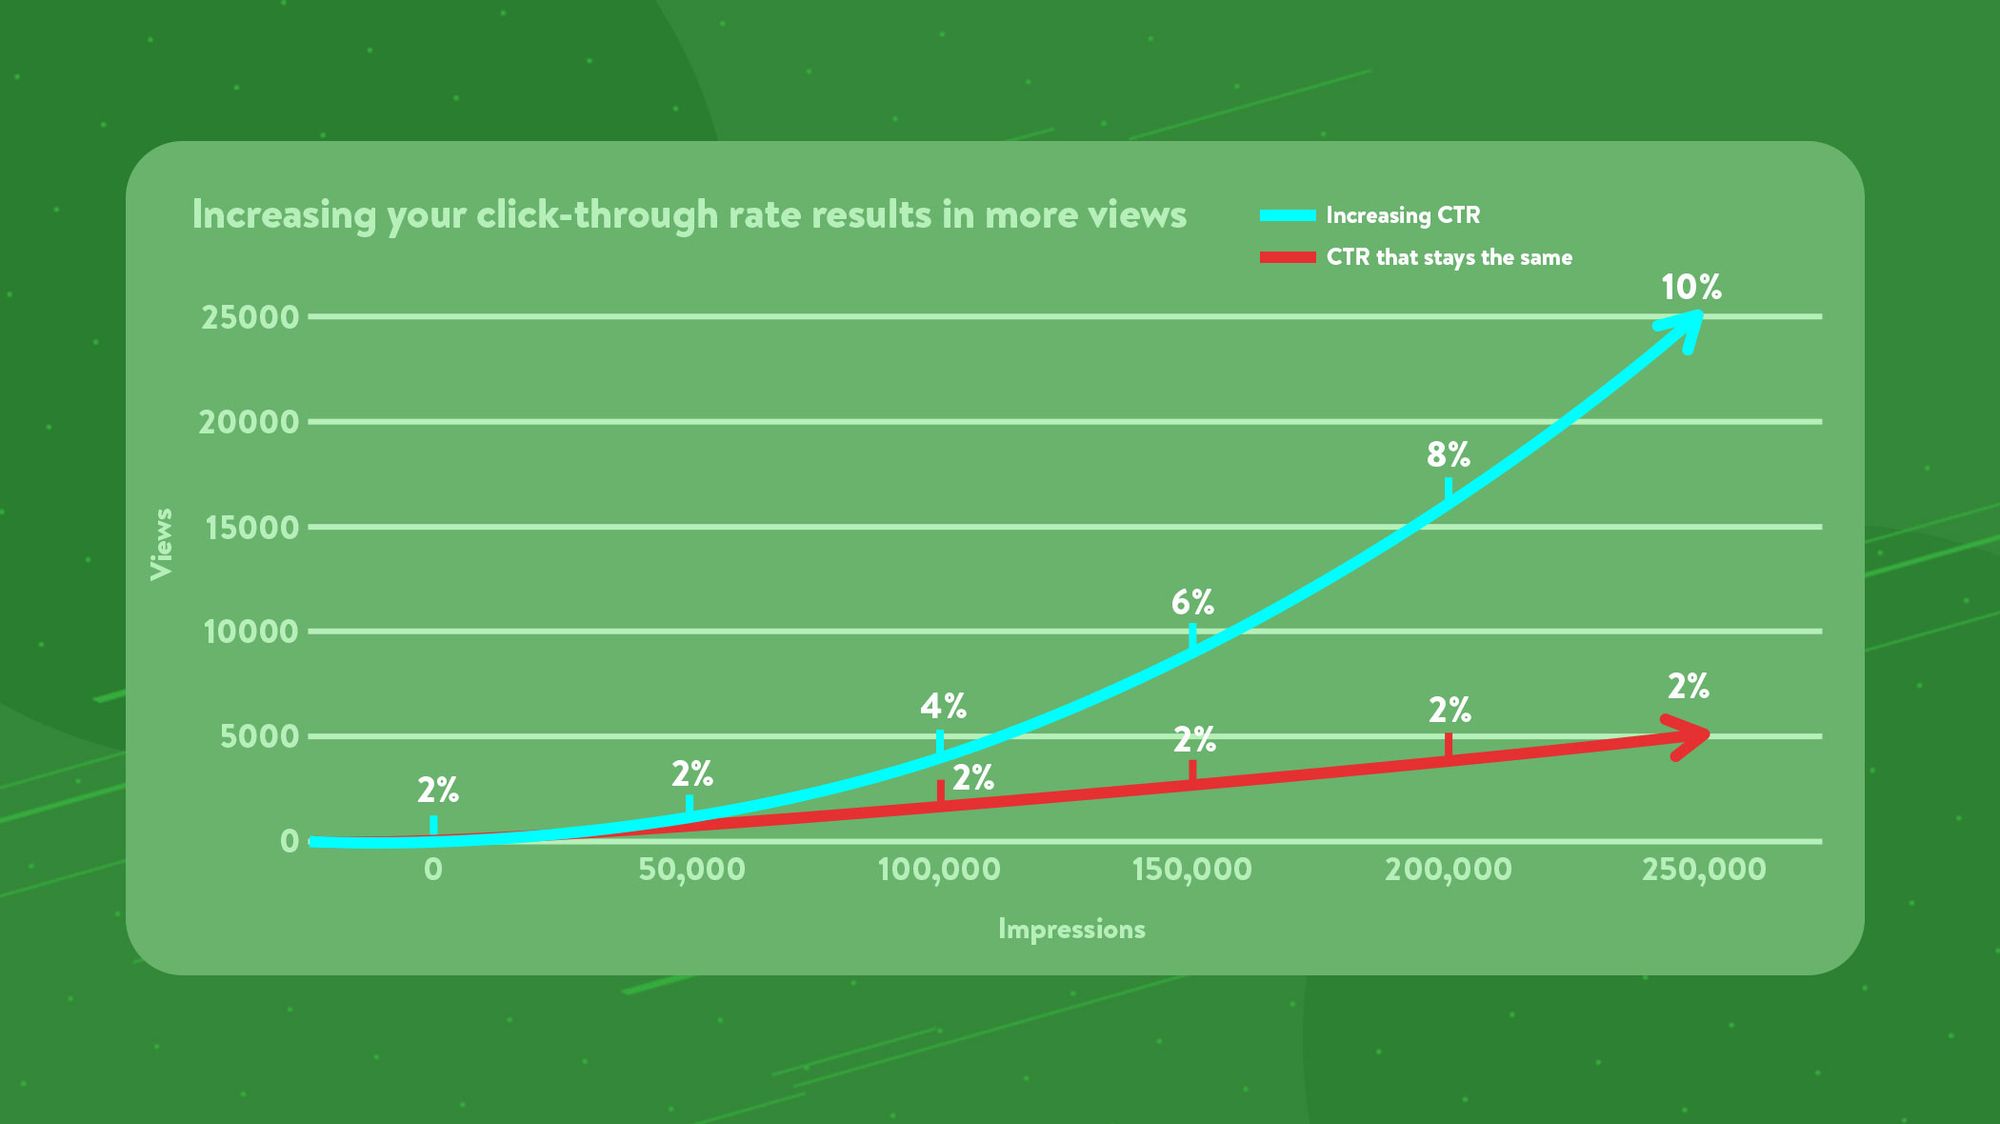 Graph showing how an increasing click-through rate results in a YouTube video getting more views for the same amount of impressions.